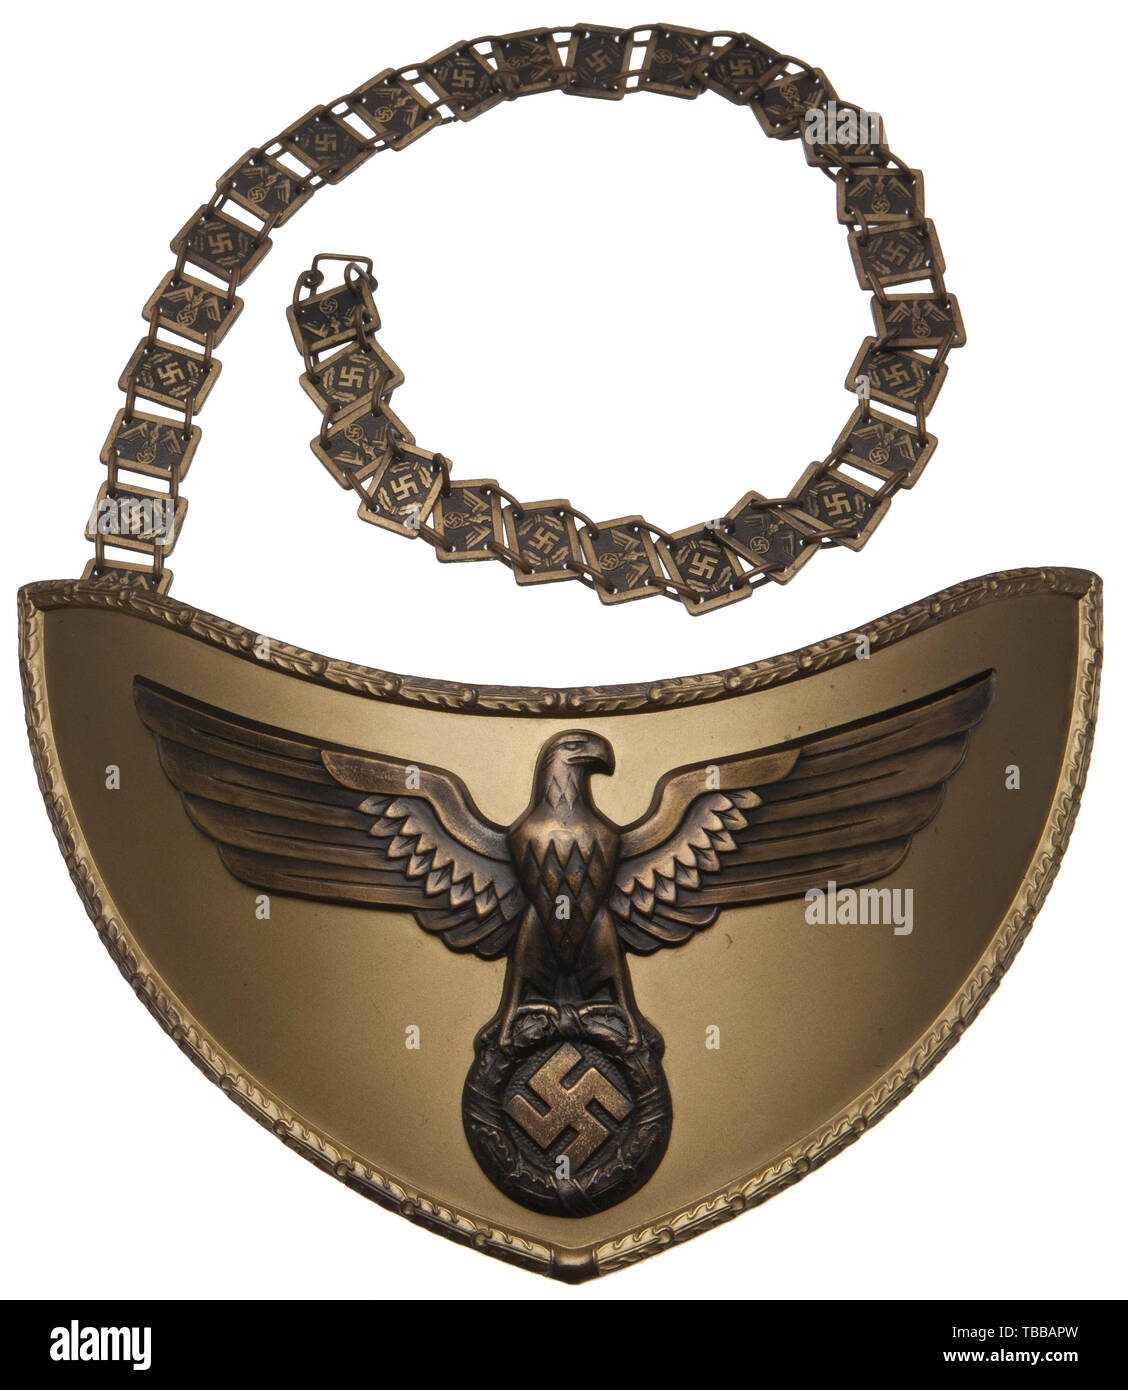 THE JOHN PEPERA COLLECTION, A Gorget for NSDAP Flag Bearer, Gold anodised kidney shaped aluminium plate with oakleaf edging and burnished eagle. Reverse covered in bright green wool complete with two chain clips each stamped 'RZM (double circle) M/14'. The gold anodised and burnished aluminium neck chain consists of alternating links with national eagles and swastikas. The first and last link each are stamped 'RZM (double circle) M/14'. Complete with heavily damaged storage box., Editorial-Use-Only Stock Photo